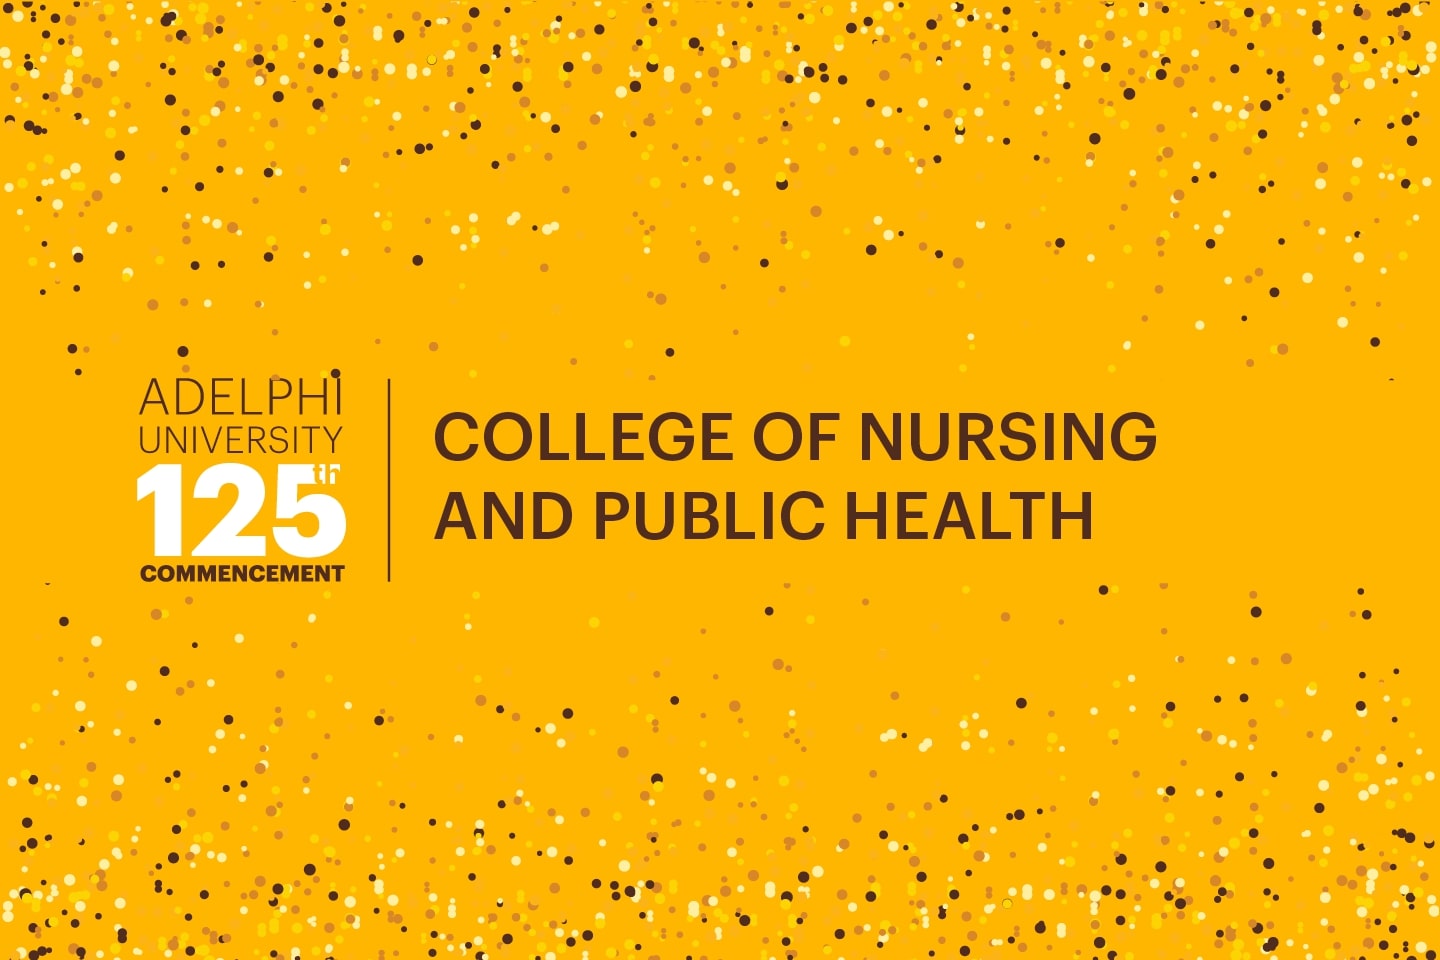 Adelphi University 125th Commencement: College of Nursing and Public Health